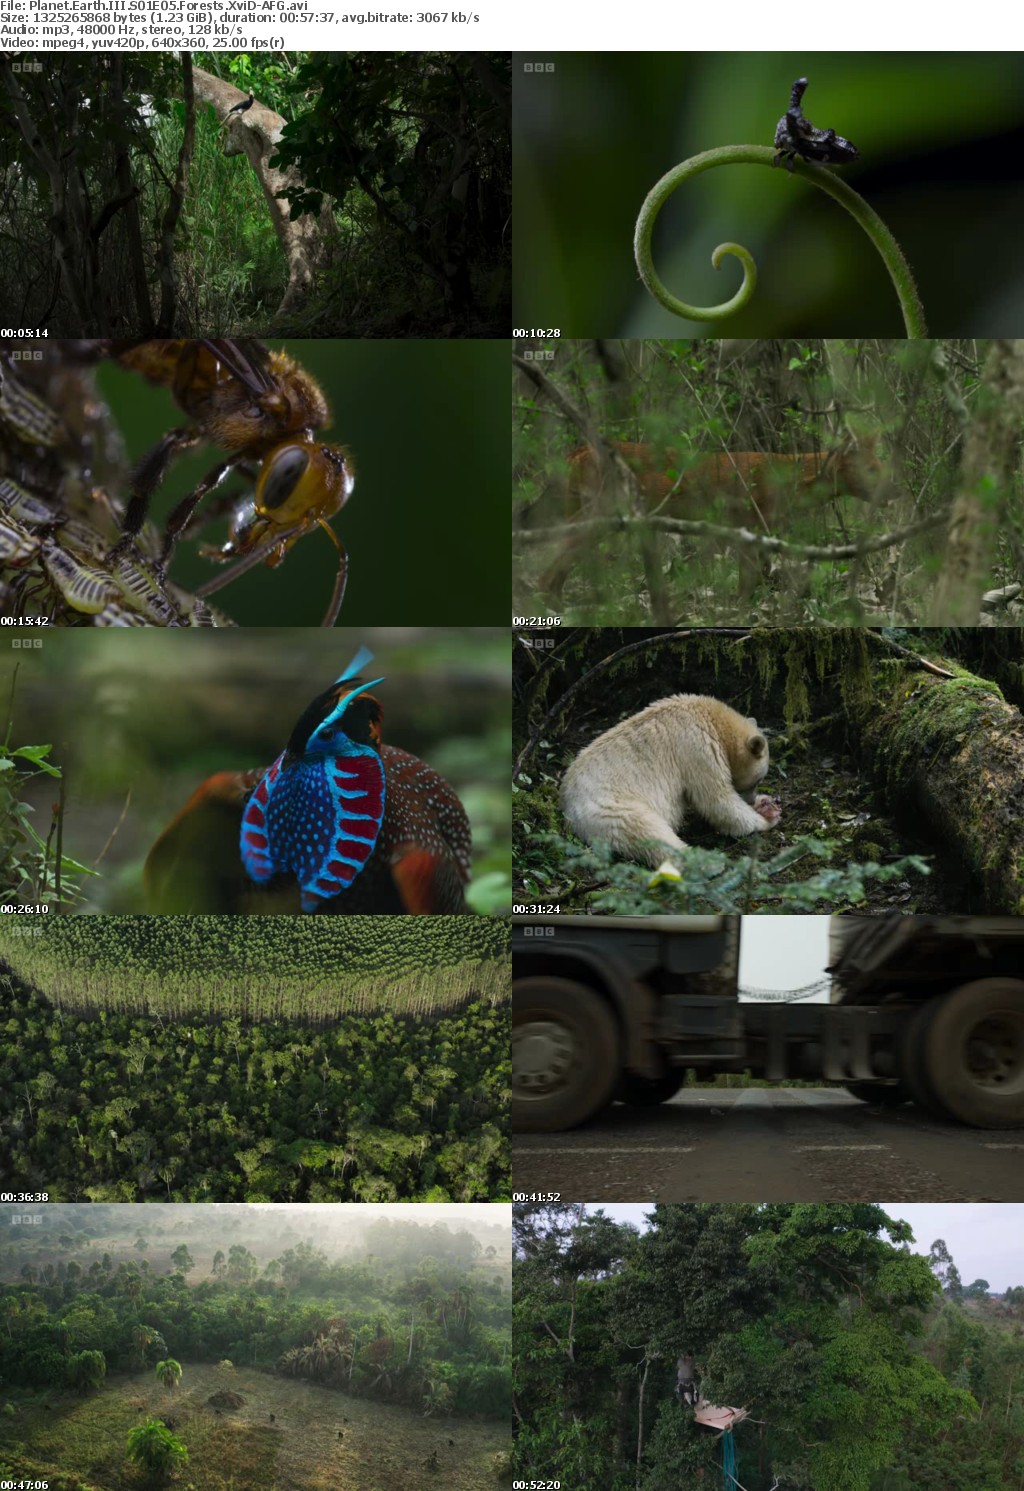 Planet Earth III S01E05 Forests XviD-AFG